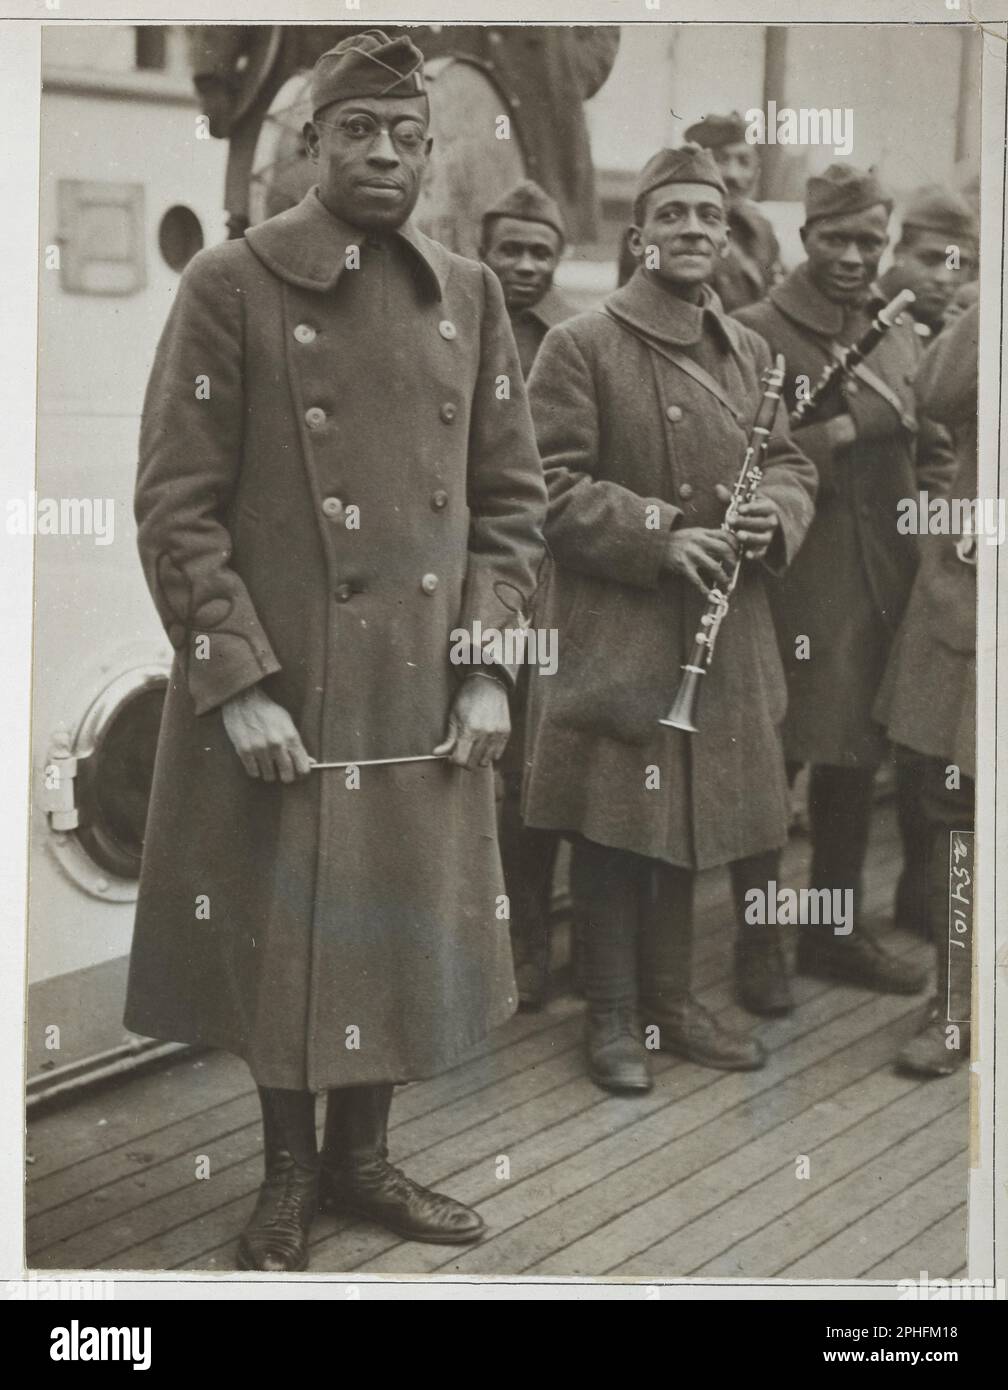 Jazz band leader and musician Lt James Reese Europe returns from war in France with the 369th Regiment, New York, NY, 2/12/1919. (Photo by Underwood and Underwood Stock Photo